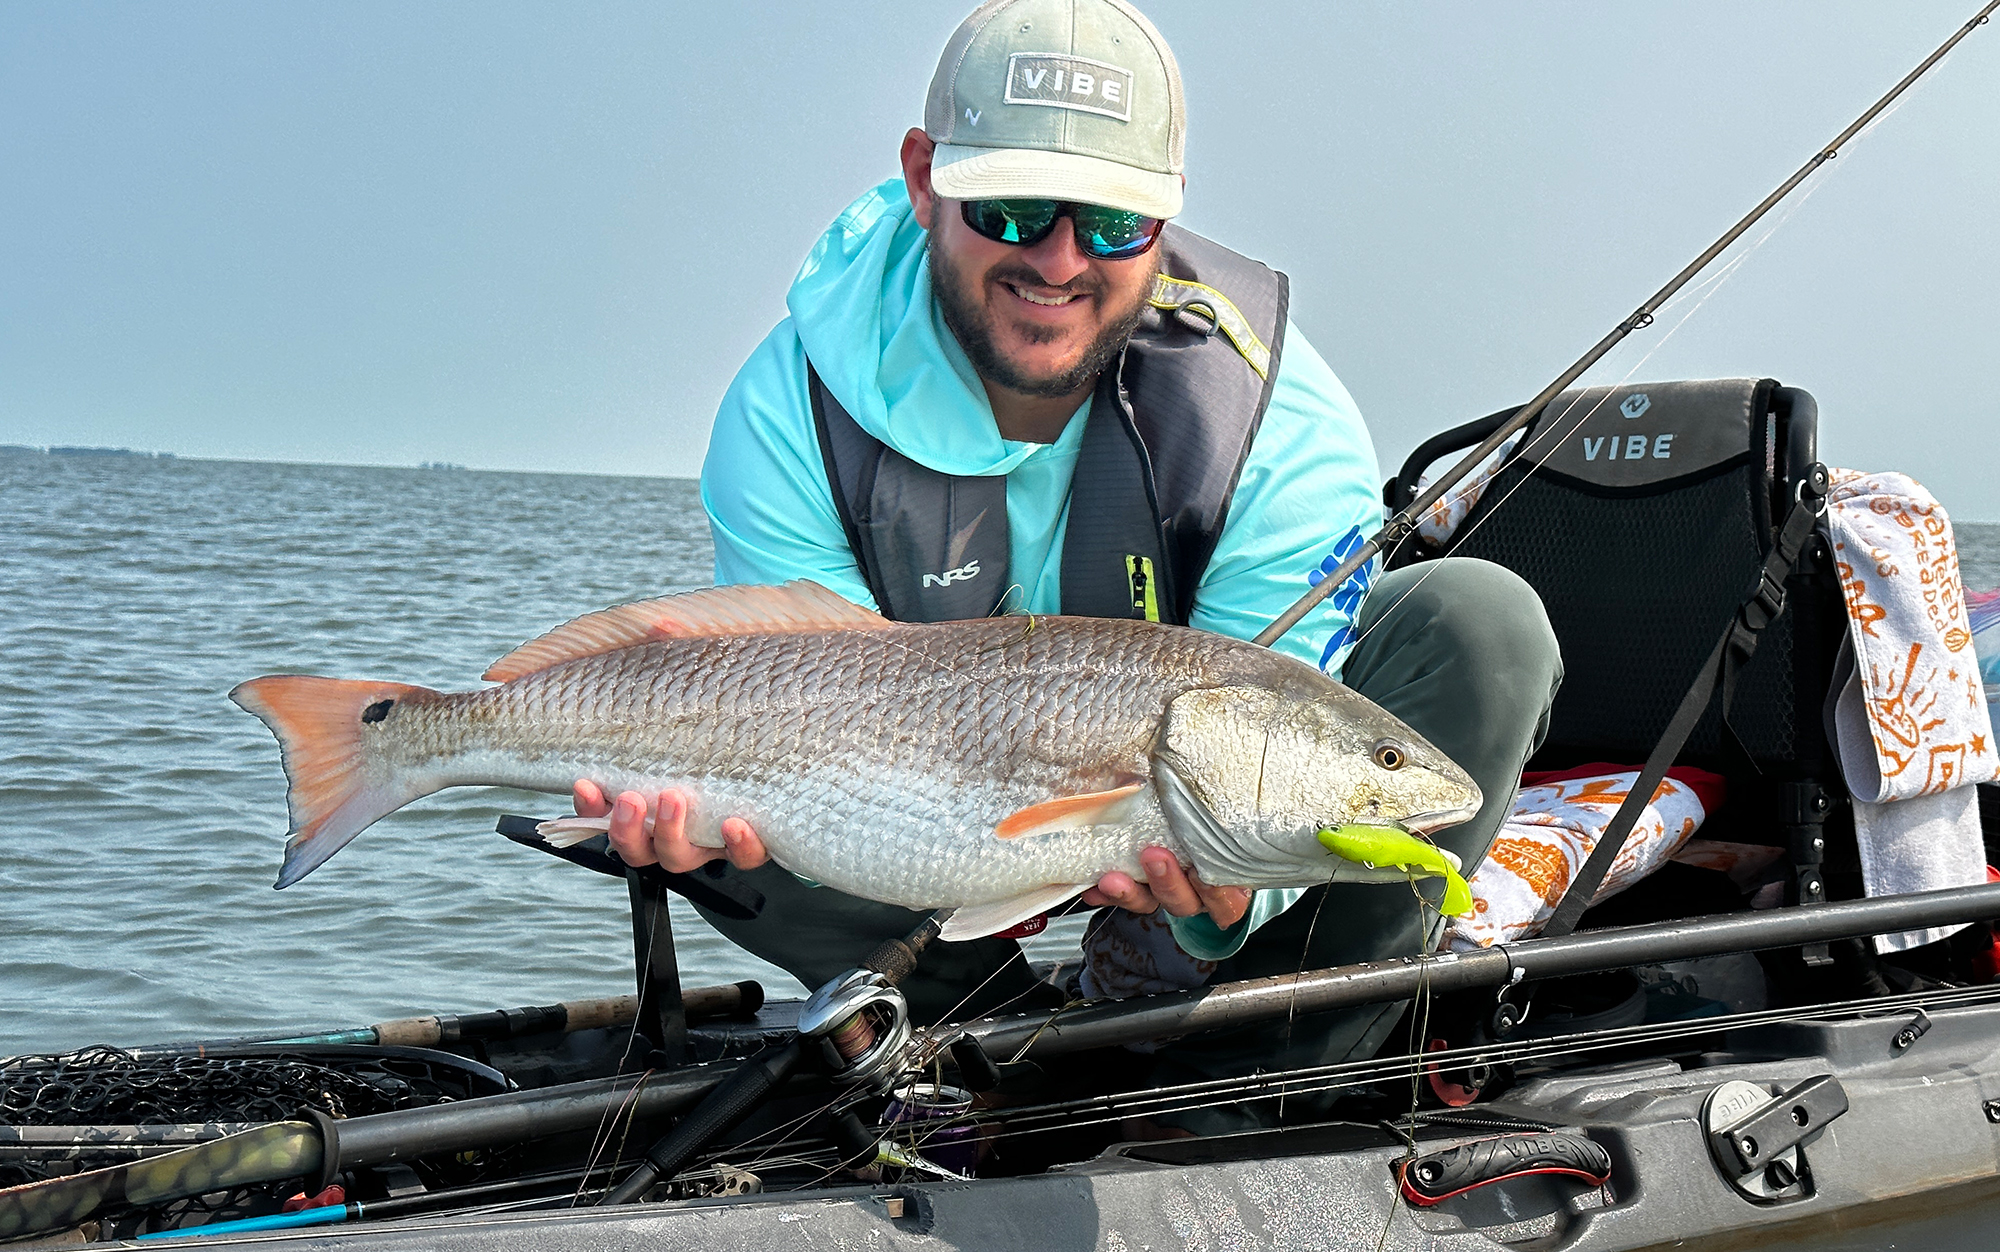 Angler hooked 35-inch redfish.